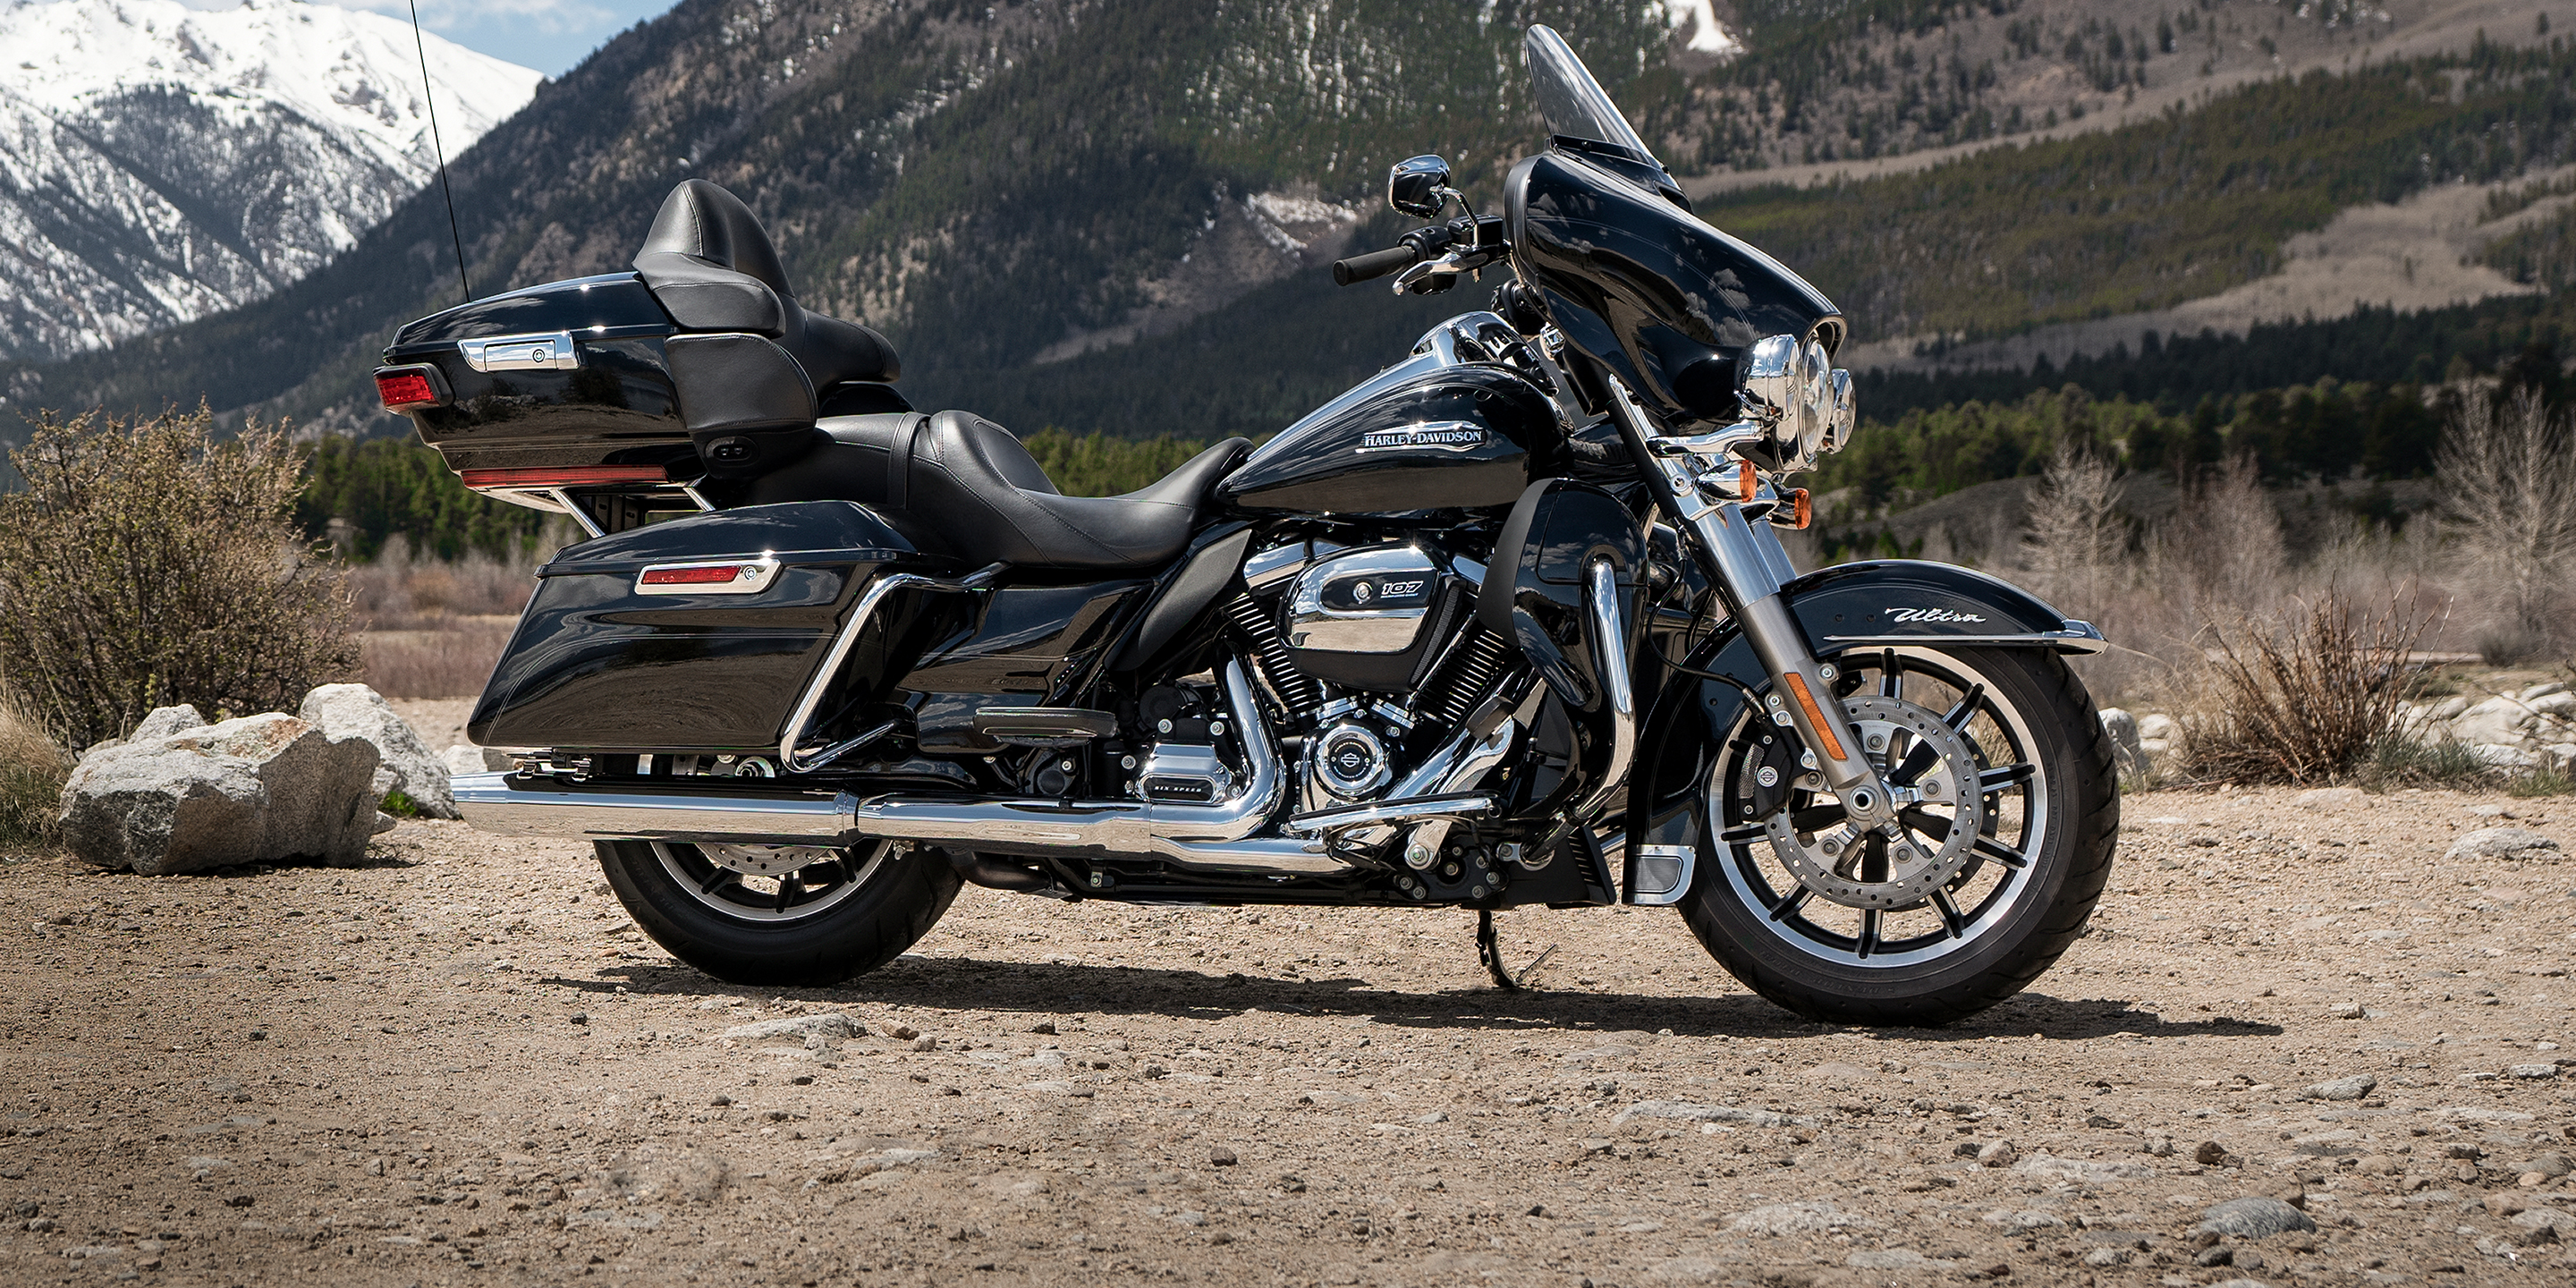  2019 Electra Glide Ultra Classic Motorcycle Harley 